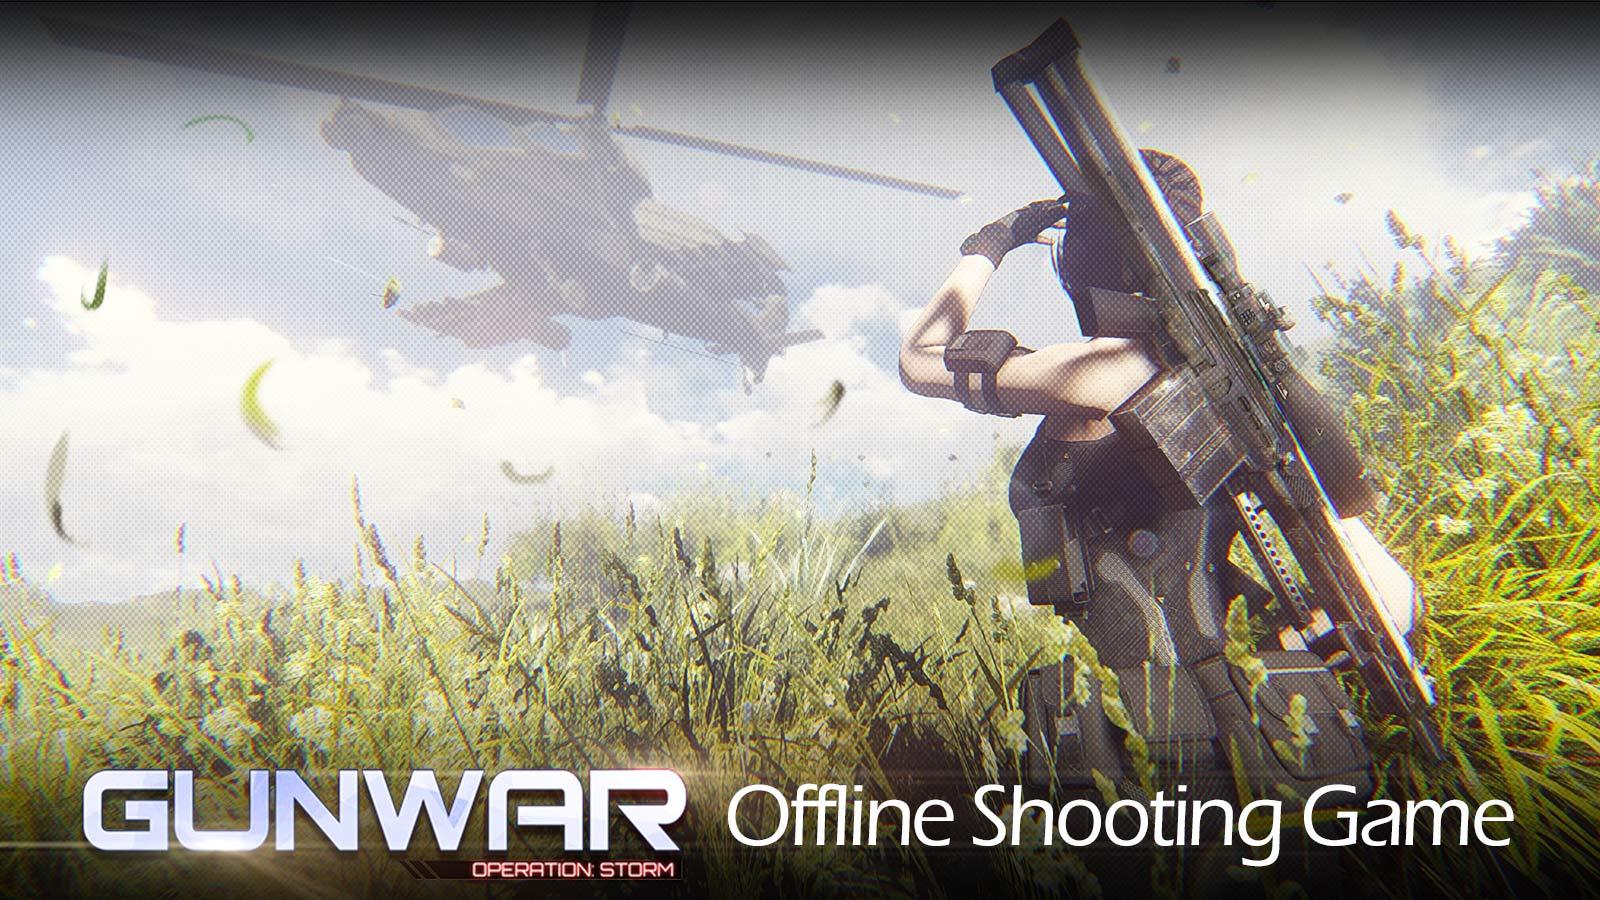 Download and play Code of War：Gun Shooting Games on PC with MuMu Player